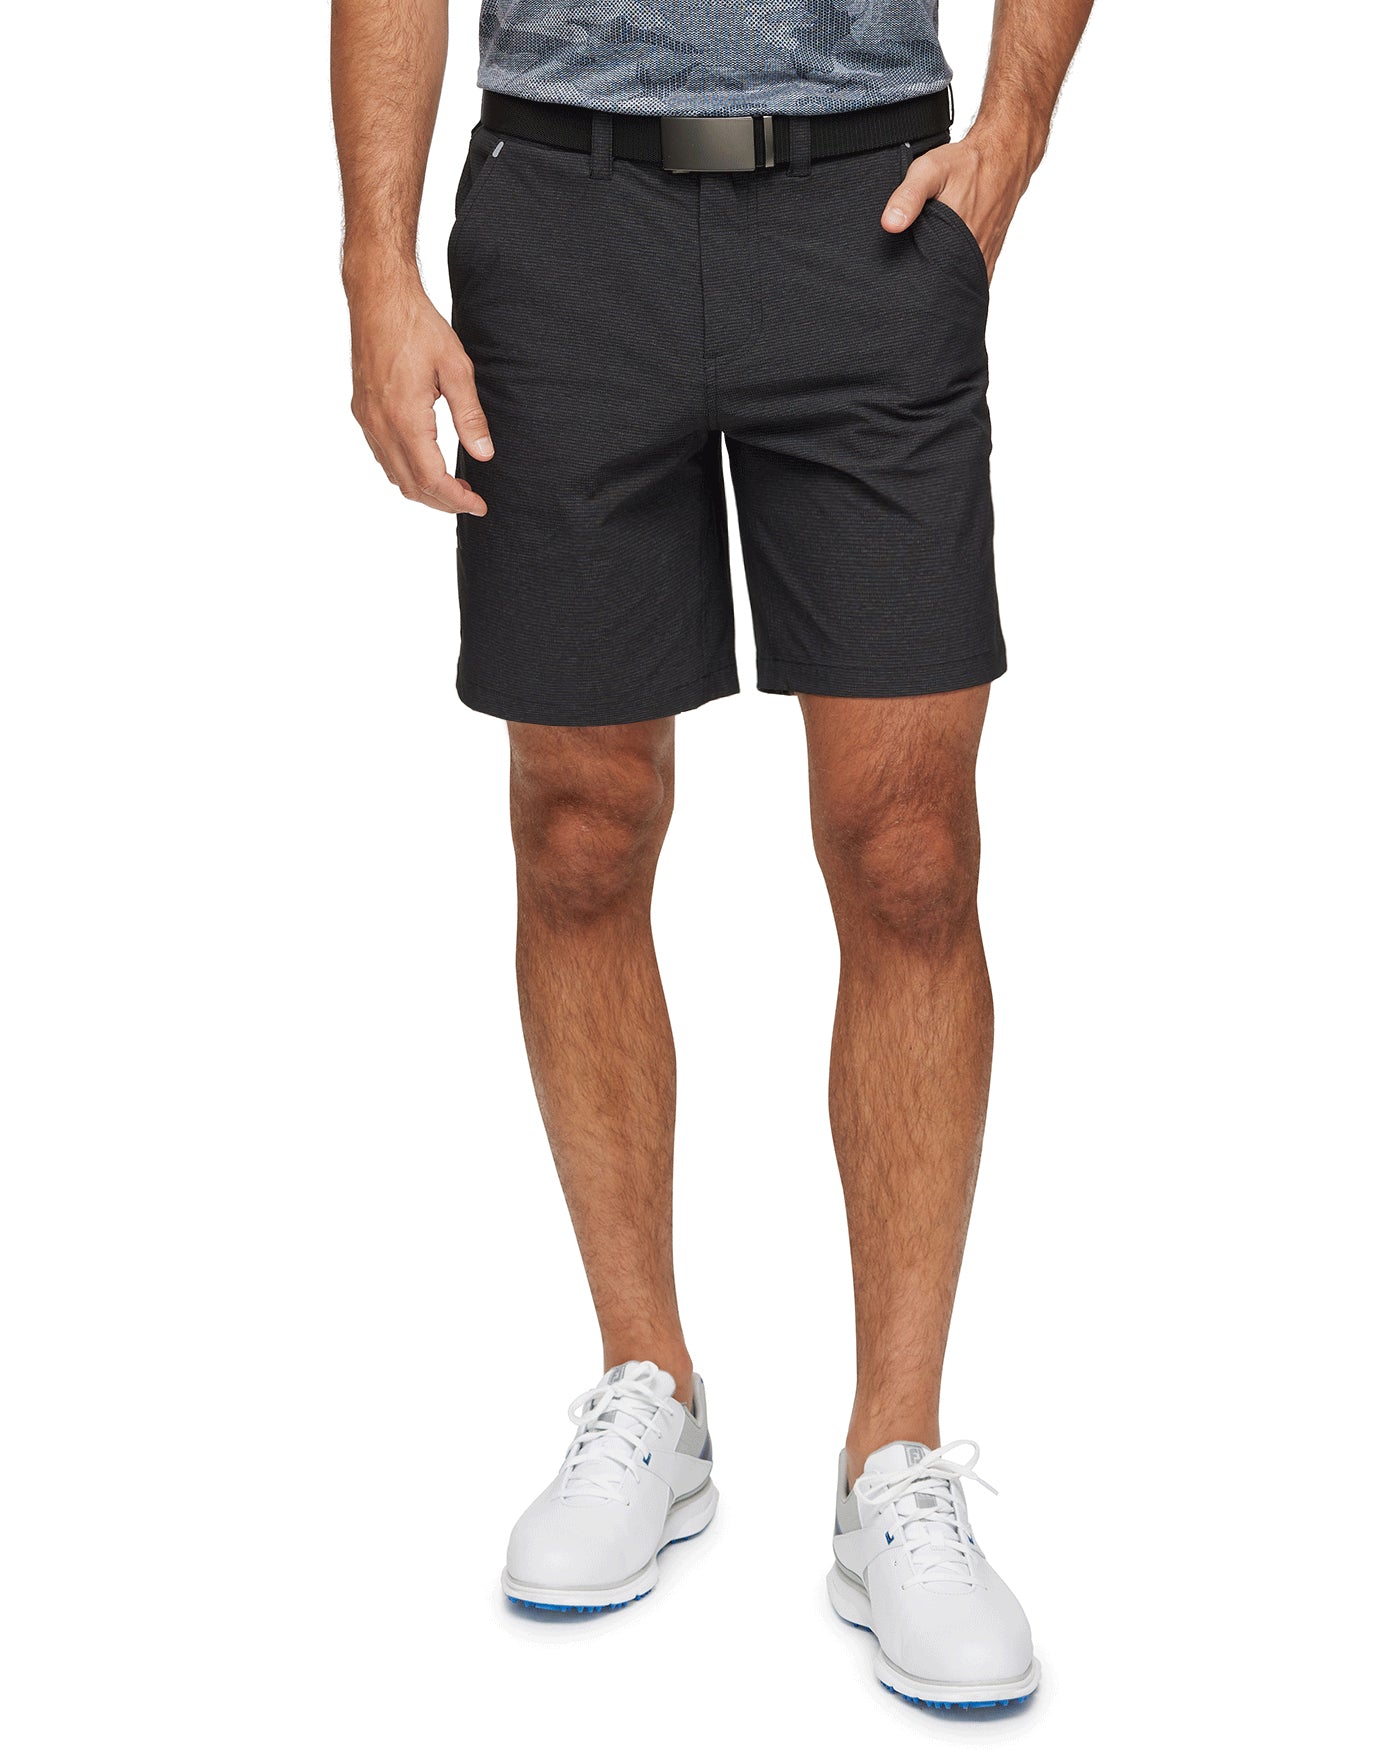 RIPSTOP ANY-WEAR PERFORMANCE SHORT - 8" INSEAM